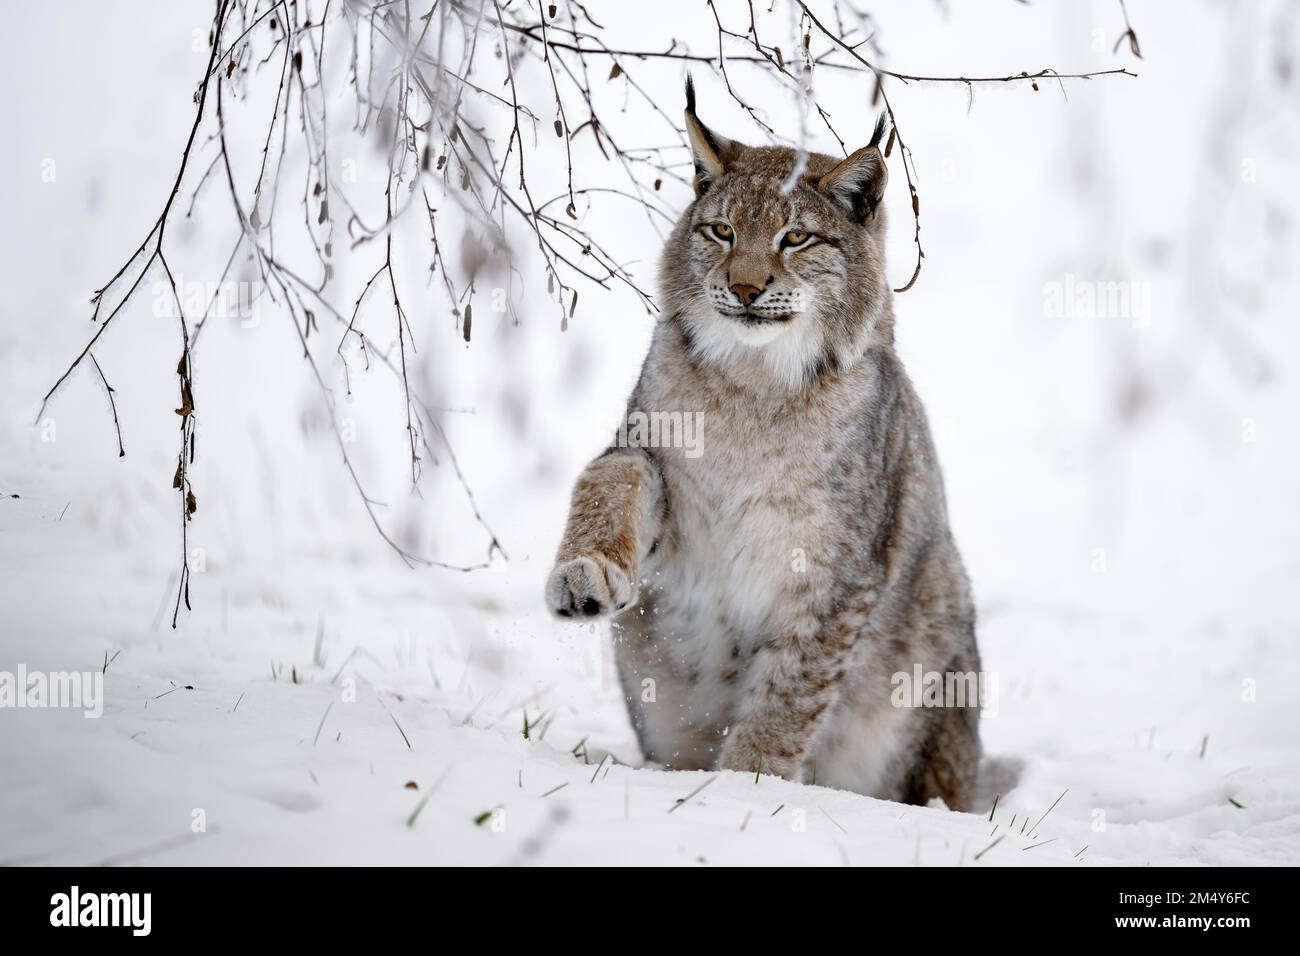 A lynx at the edge of the forest inspects the newly fallen snow Stock Photo  - Alamy